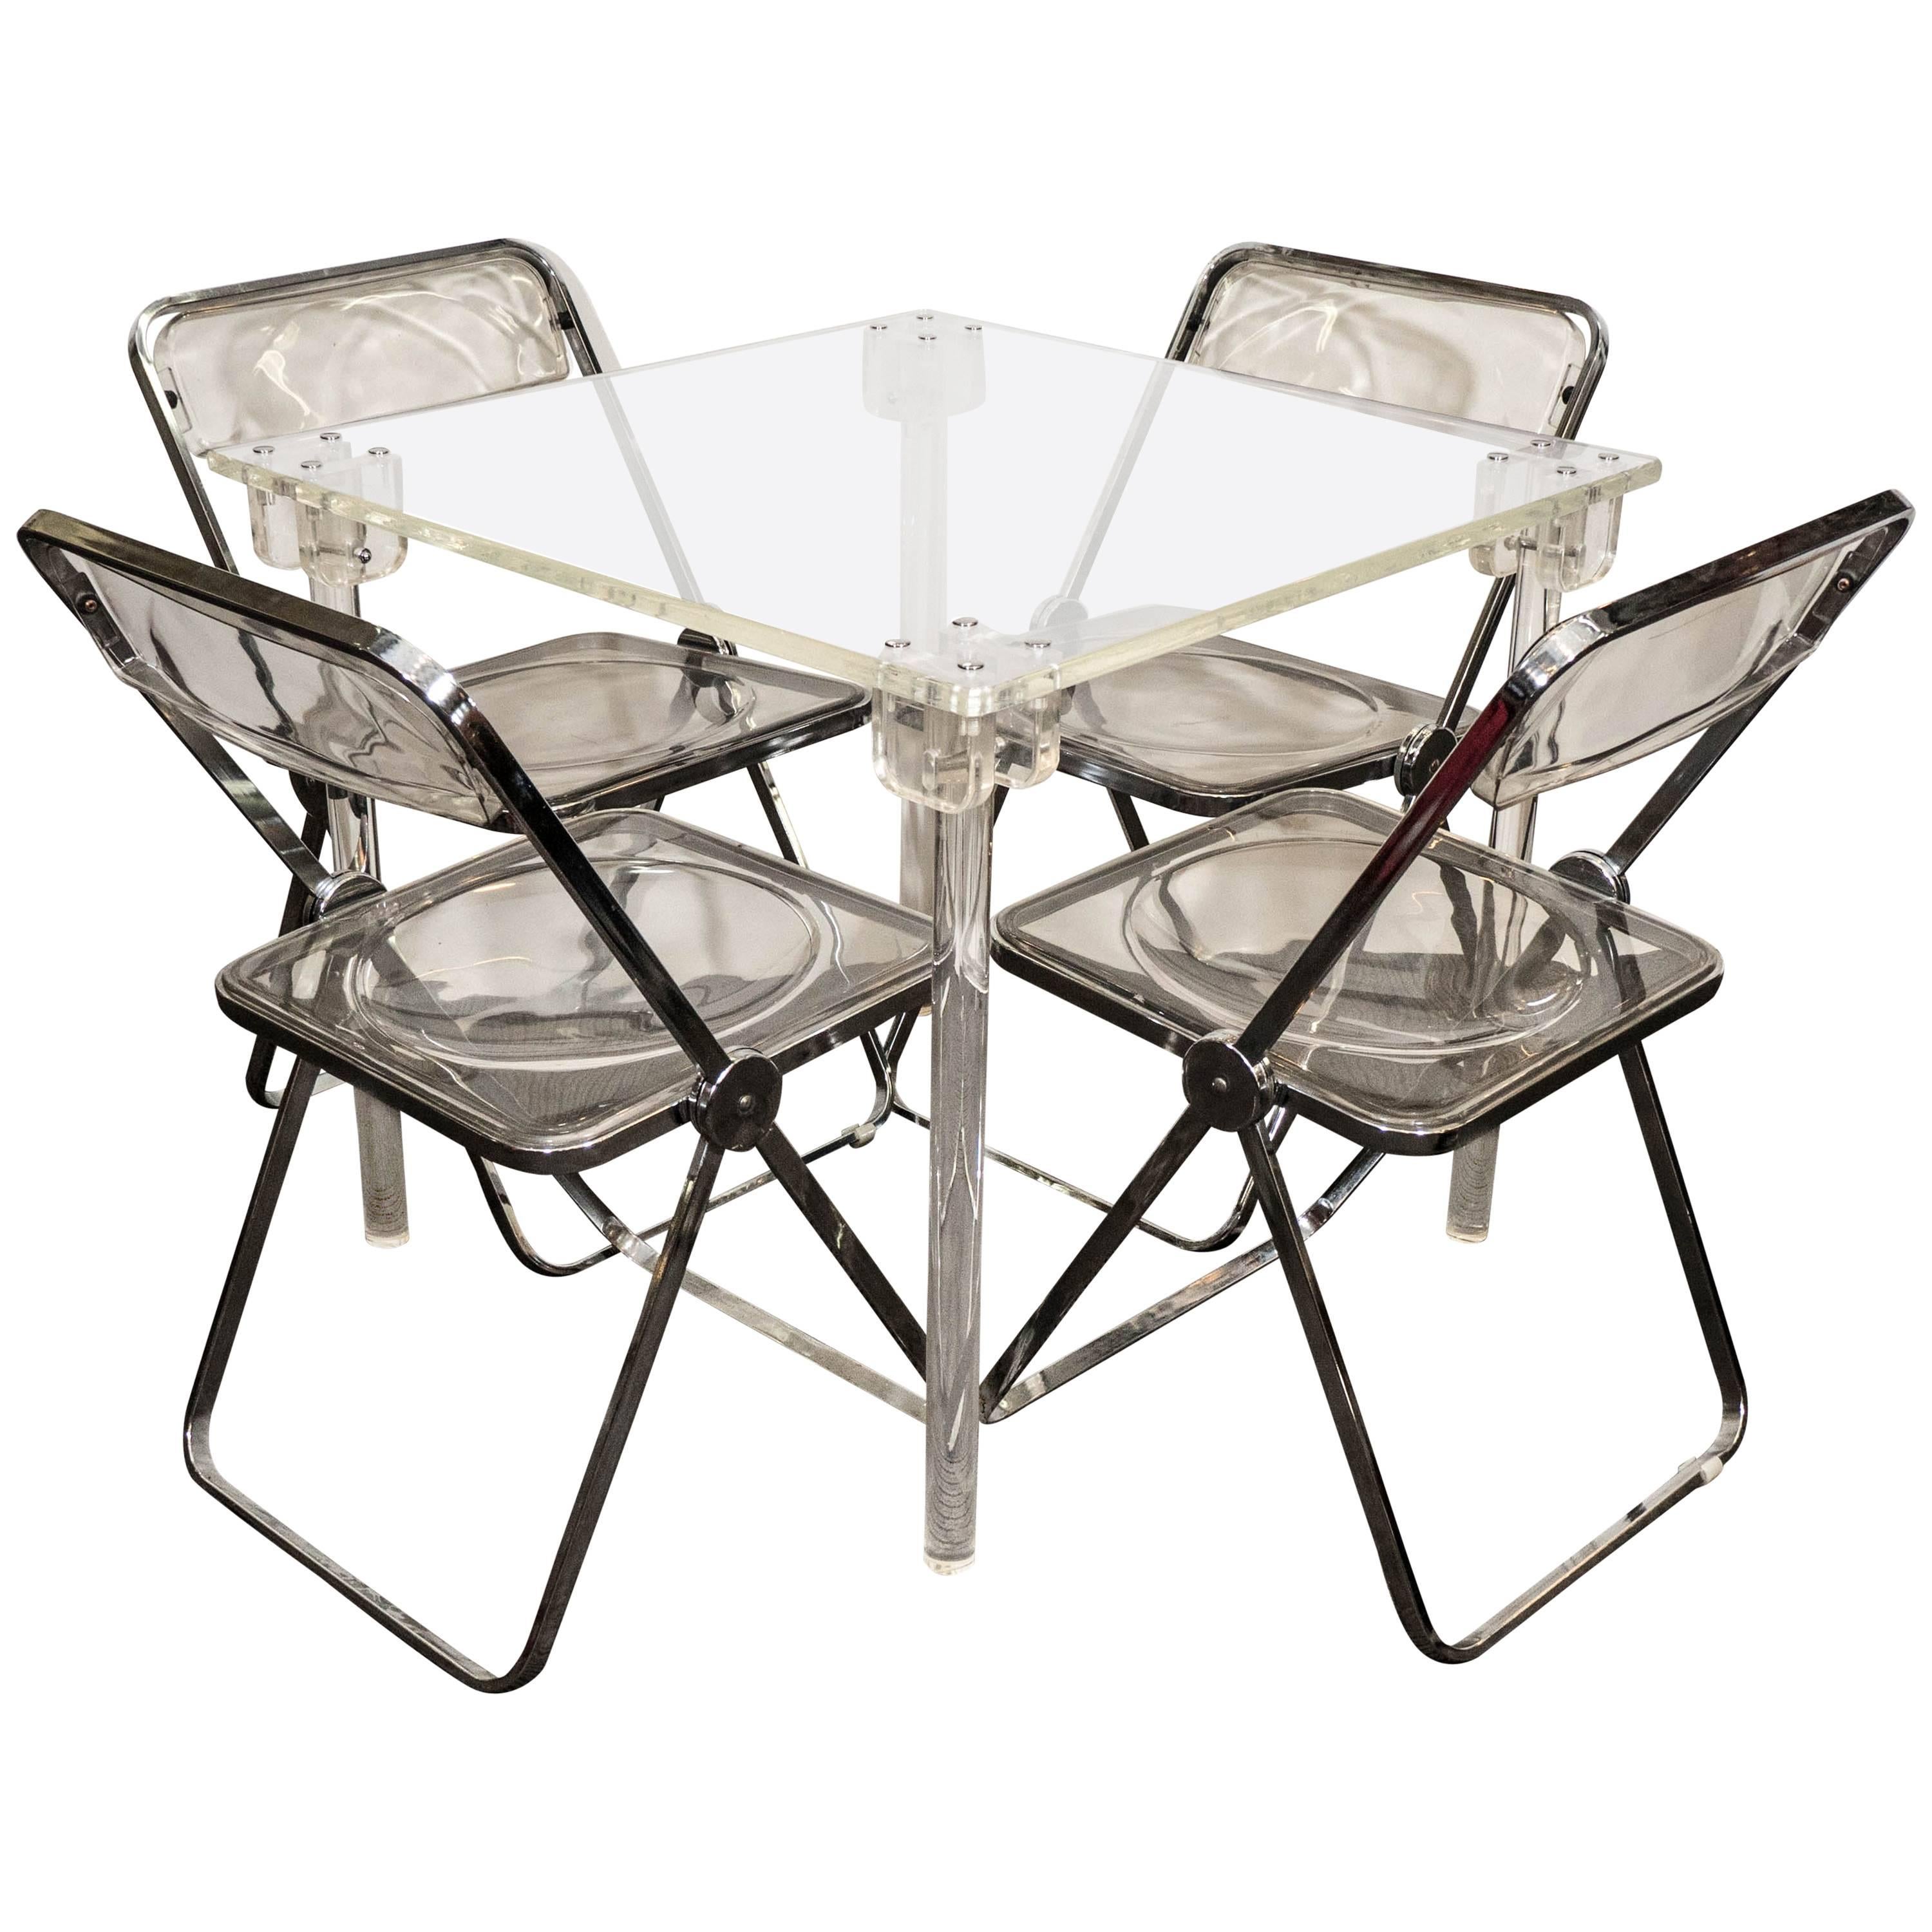 Charles Hollis Jones Lucite Game Table with Set of Four Piretti 'Plia' Chairs